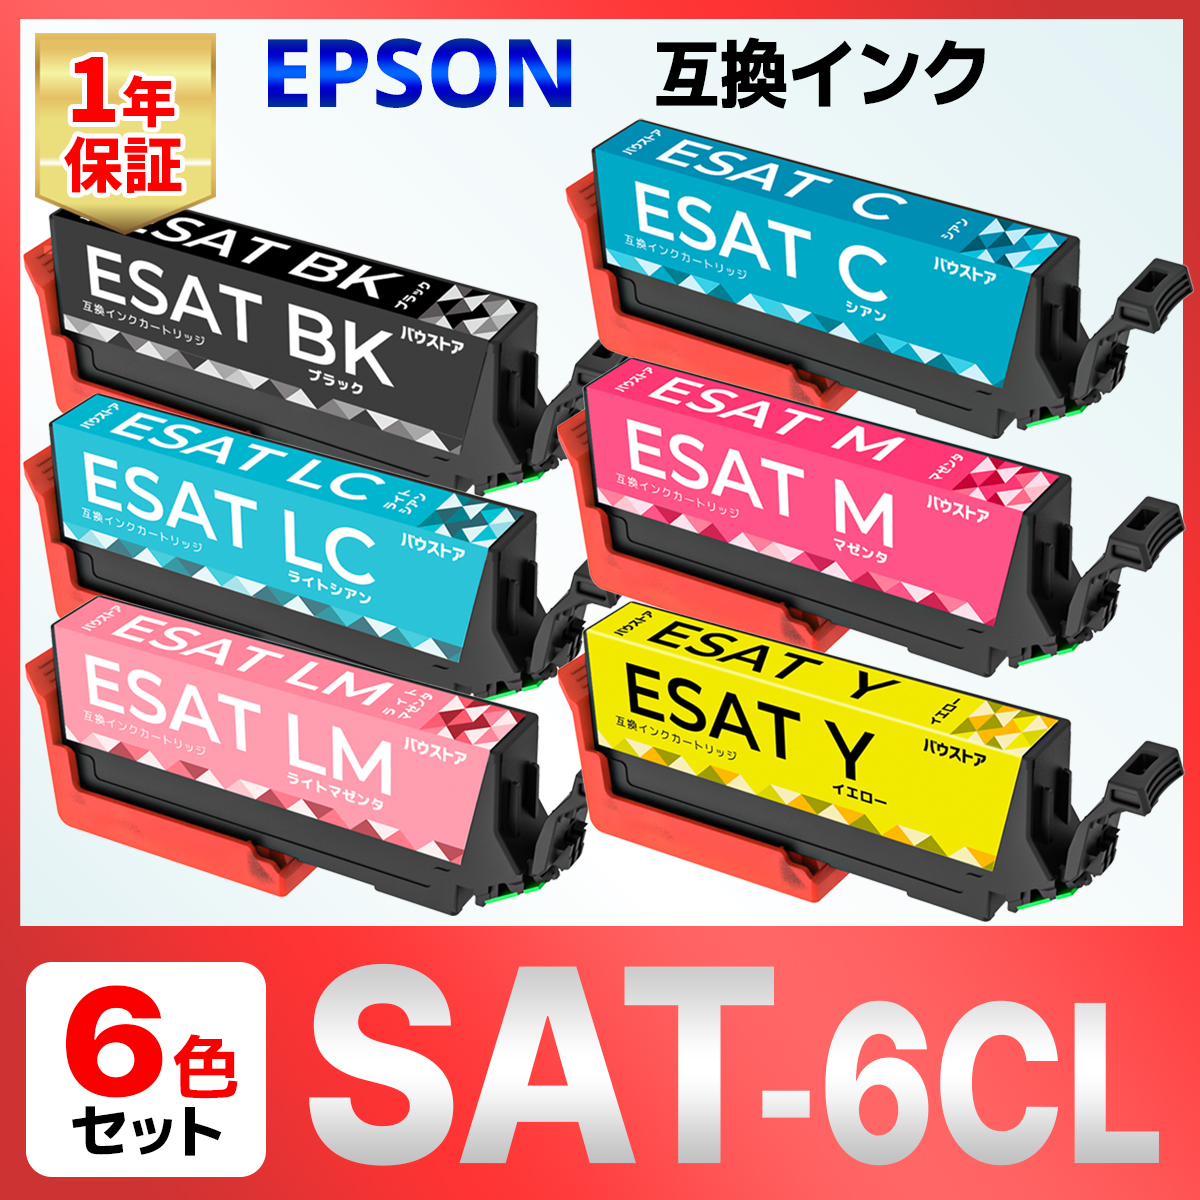 SAT-6CL SAT サツマイモ 互換 インク ６個 EPSON エプソン EP-712A EP